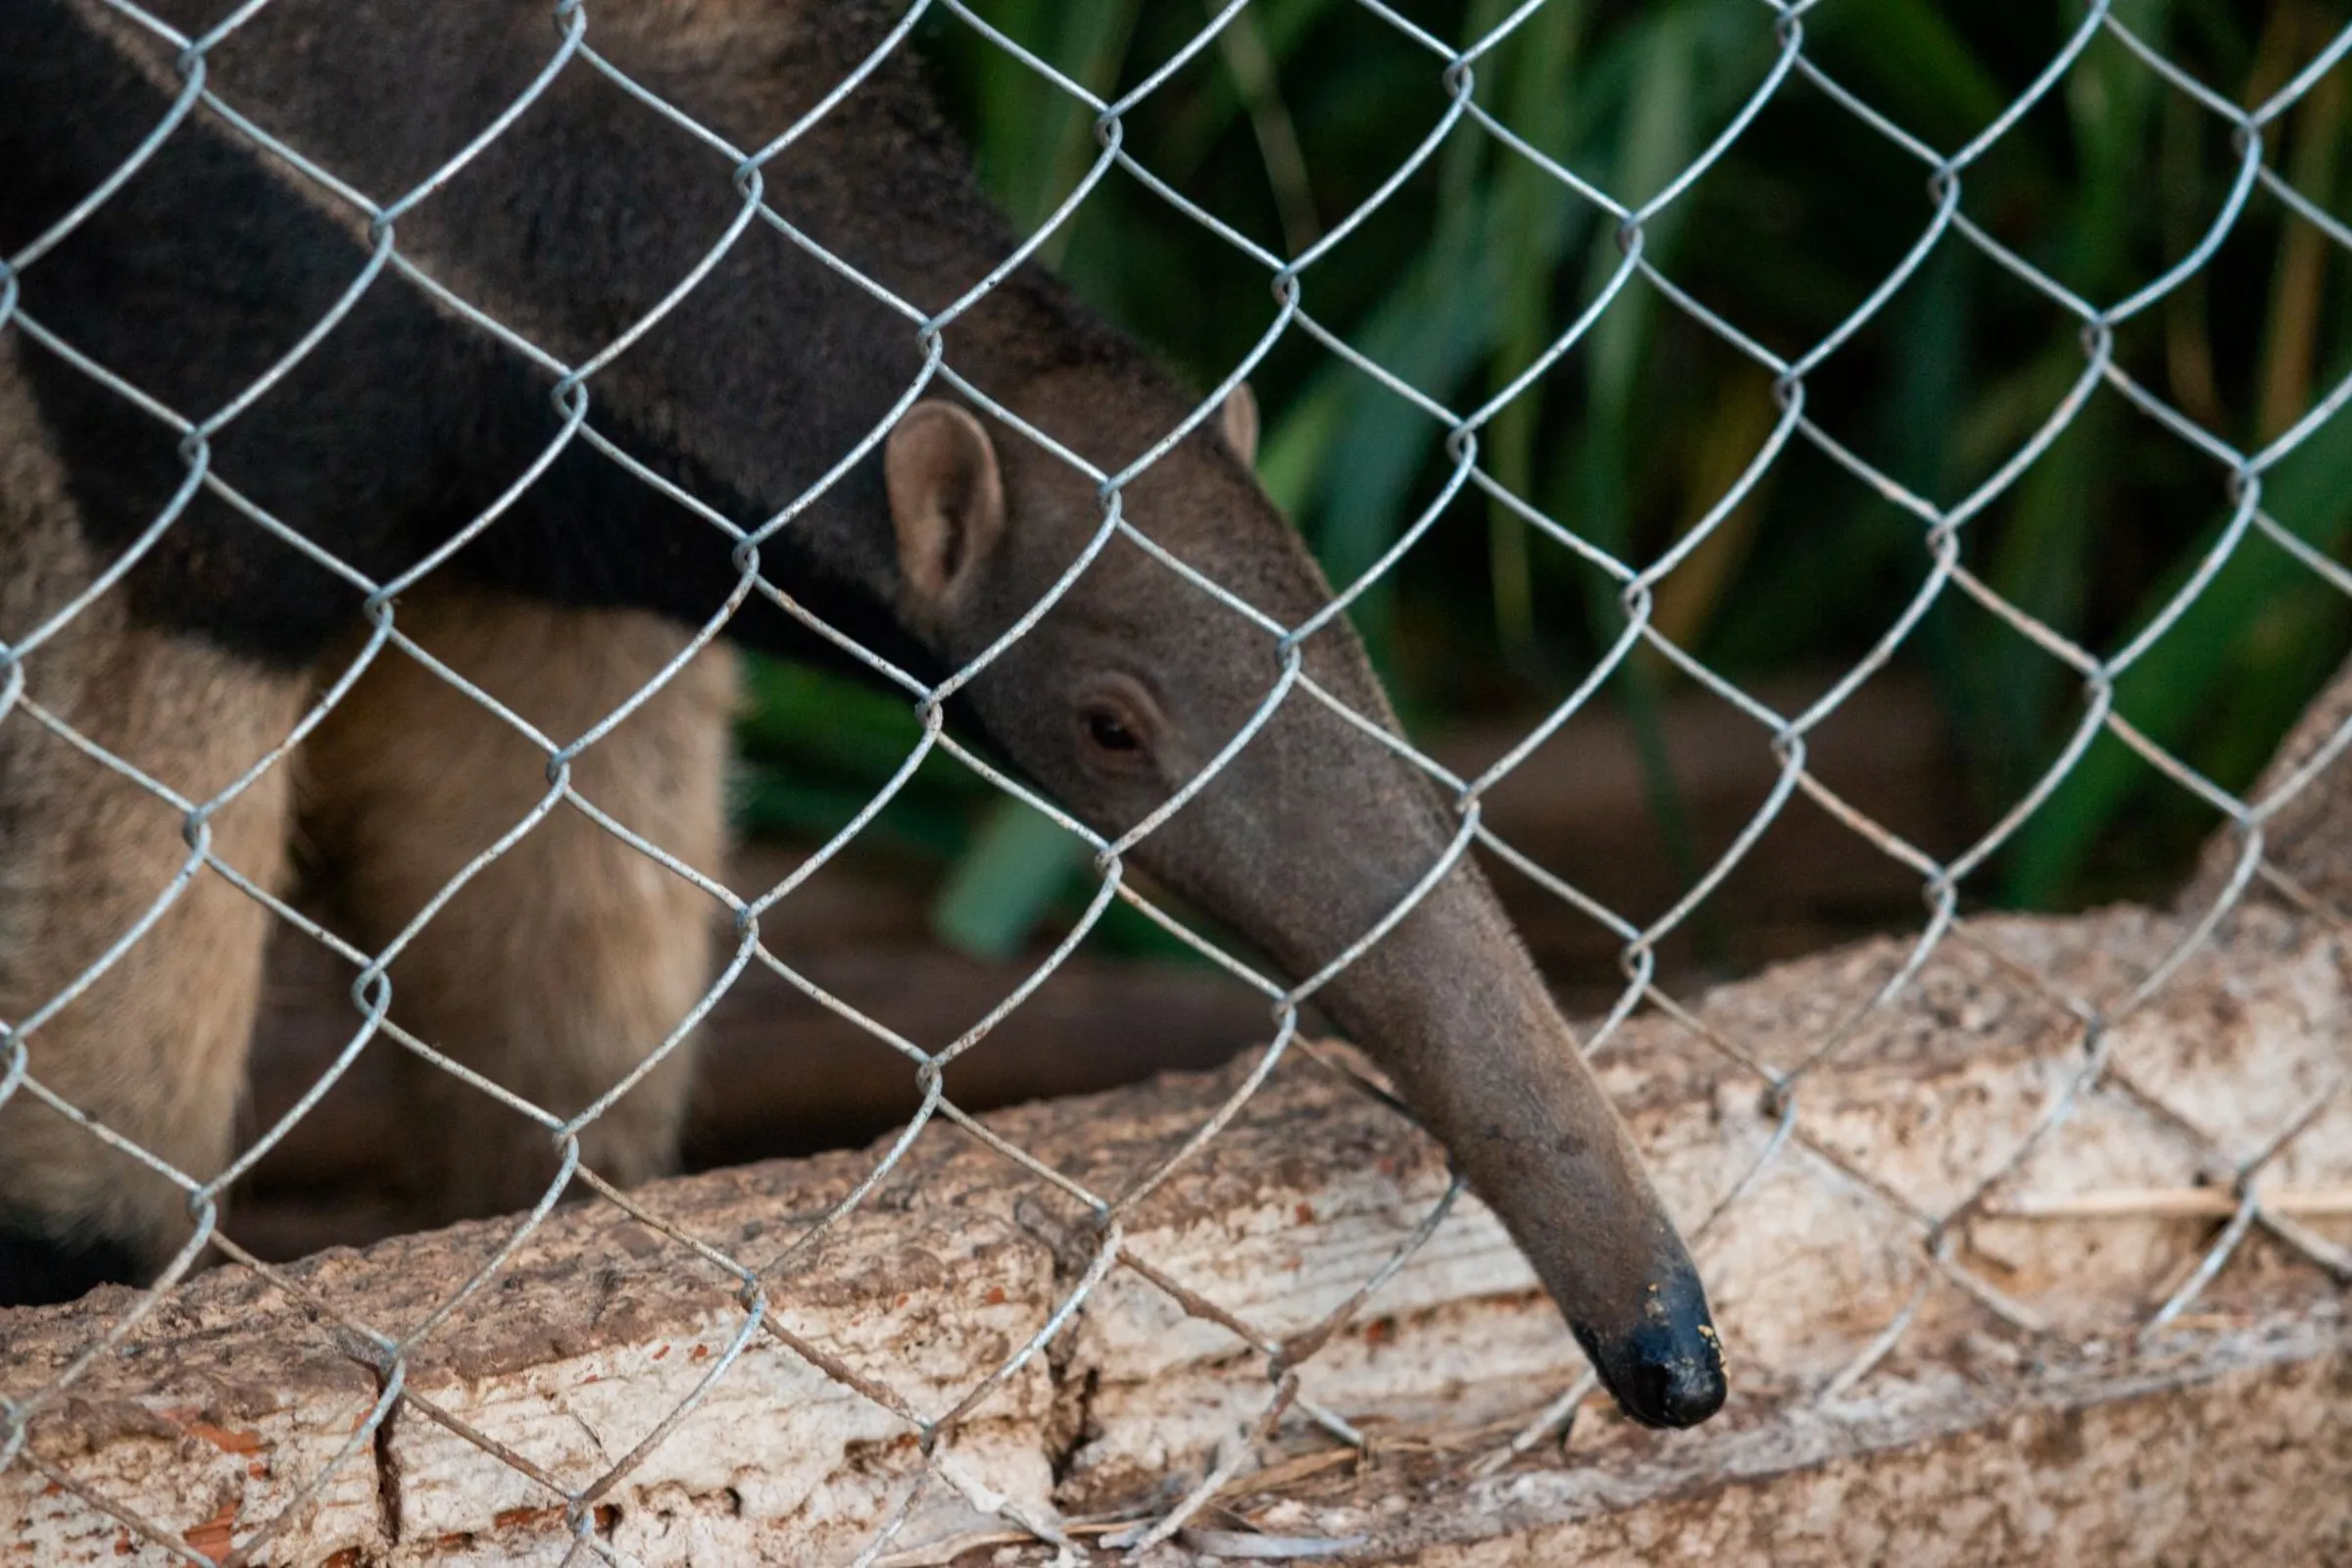 Giant anteater sticks its snout through chain linked fence in rural Aquidauana, Mato Grosso do Sul state, Brazil, September, 15, 2022. Thomson Reuters Foundation/Henrique Kawaminami